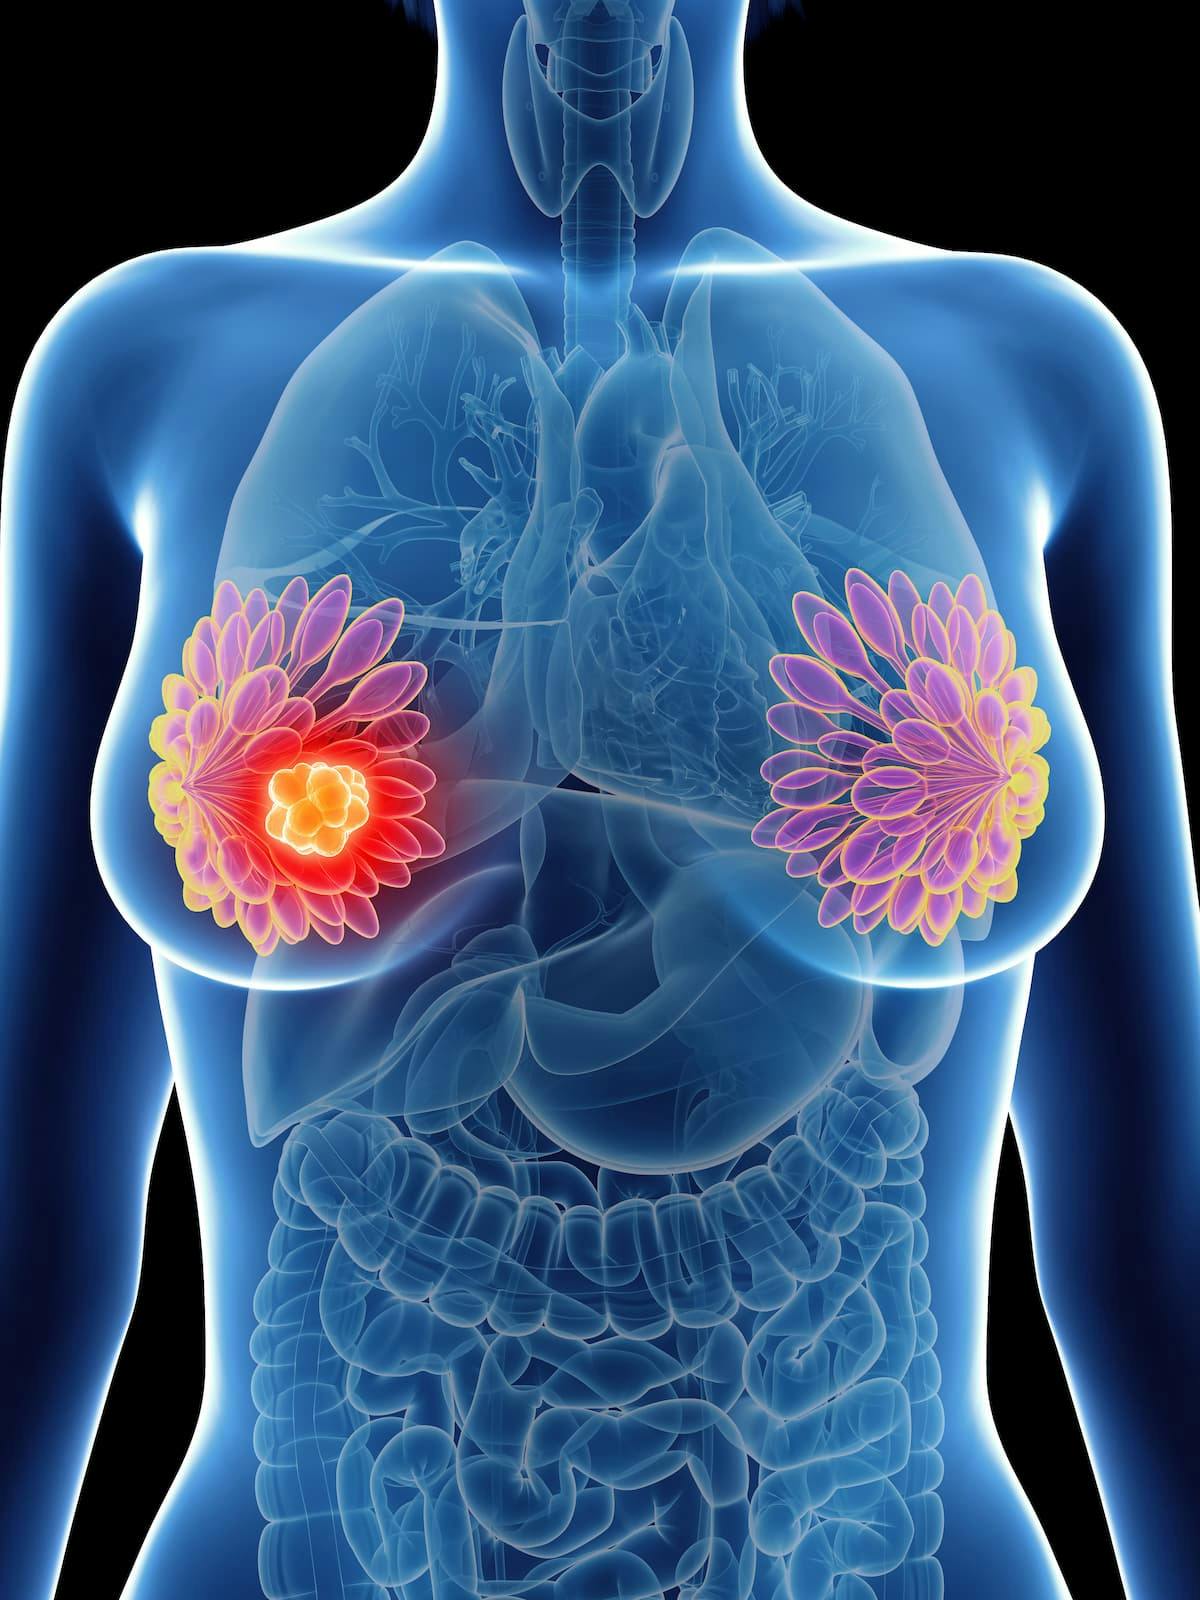 Experts believe that use of the Breast Cancer Index test in patients with early-stage, hormone receptor–positive breast cancer who are undergoing treatment with endocrine therapy may help to identify those who could be good candidates for the addition of ovarian function suppression.